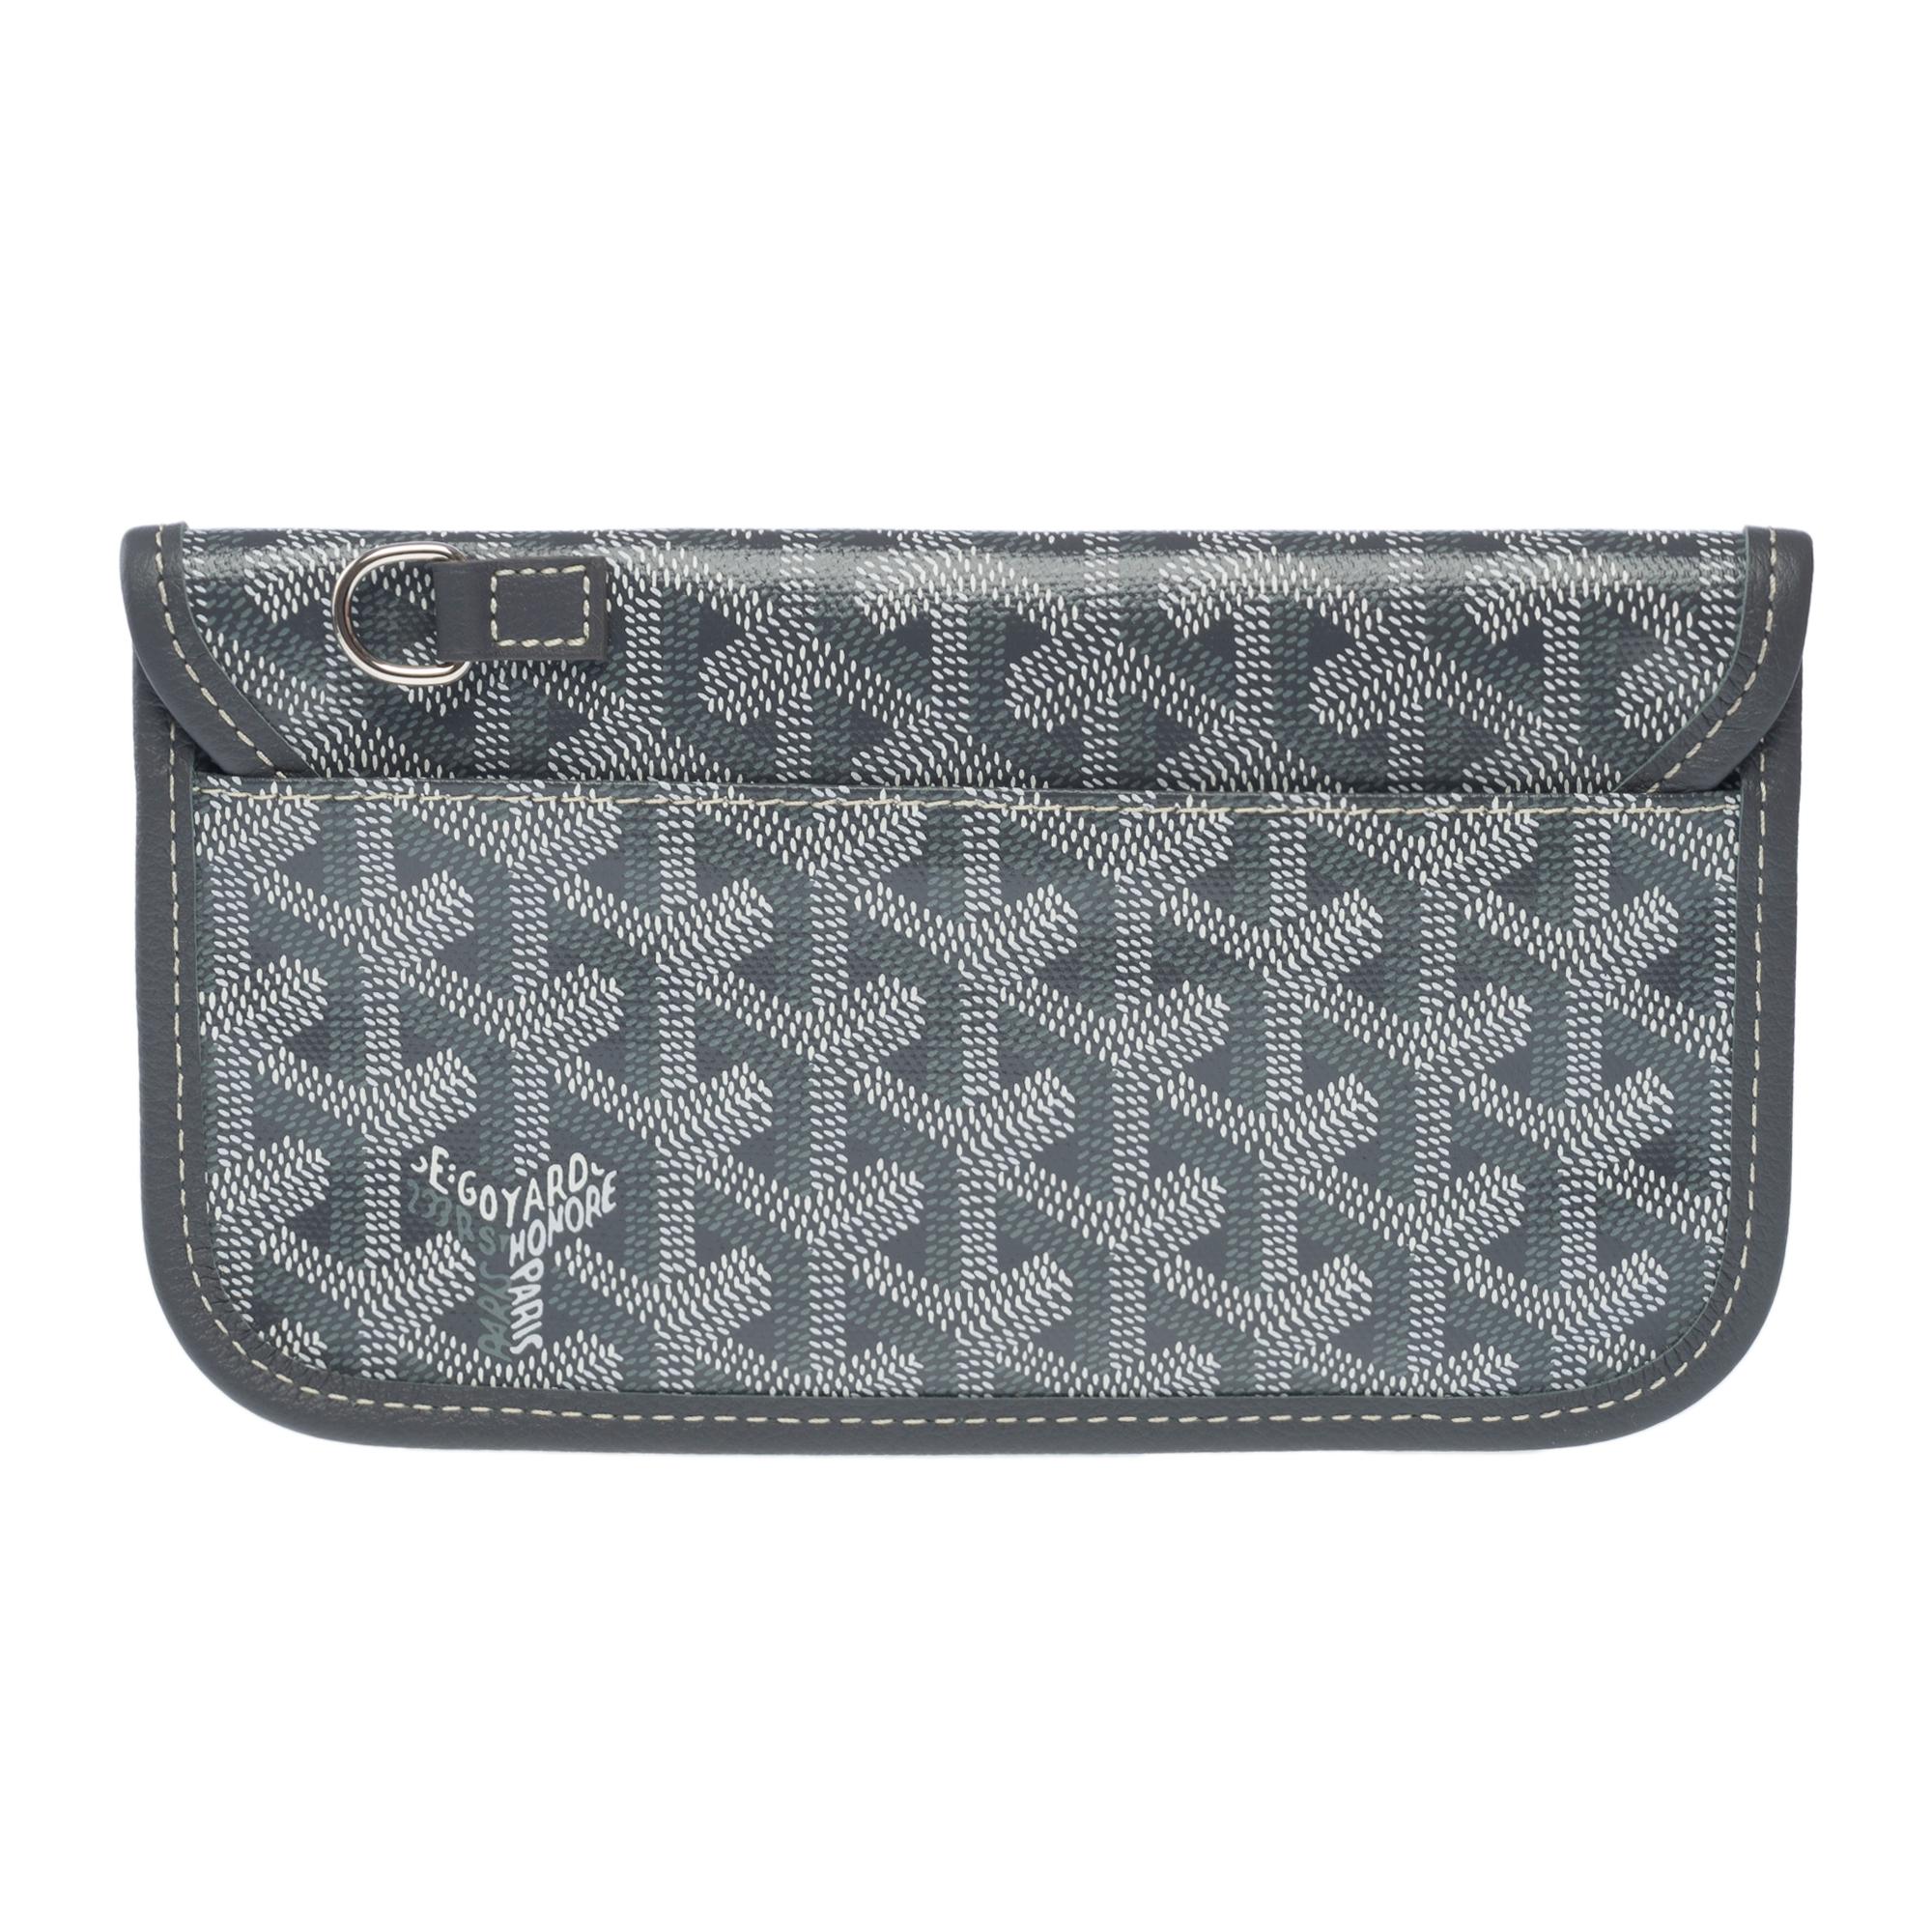 Women's New Goyard Saint-Louis Pouch in grey and white canvas, SHW For Sale